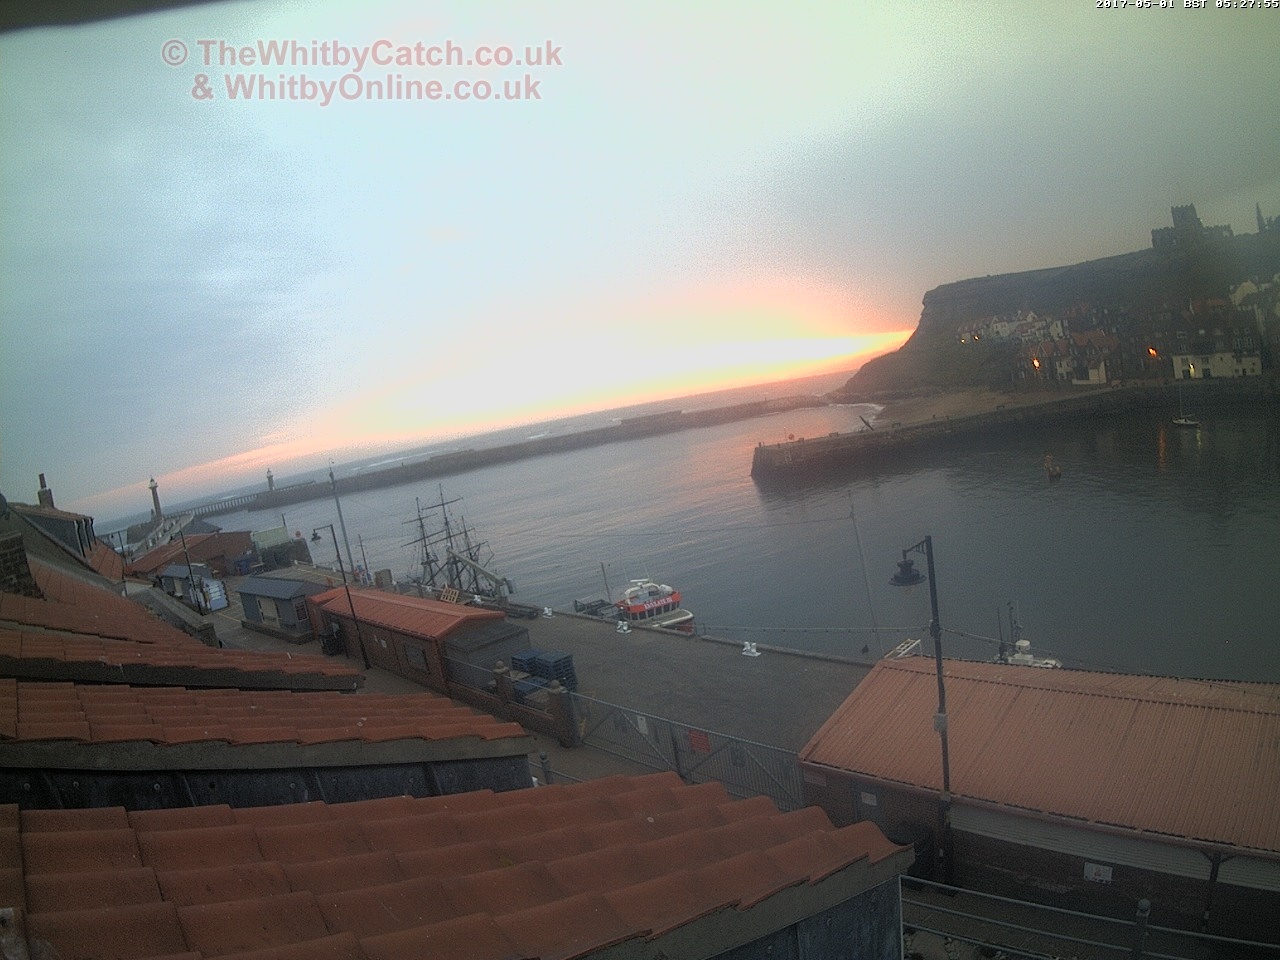 Whitby Mon 1st May 2017 05:28.